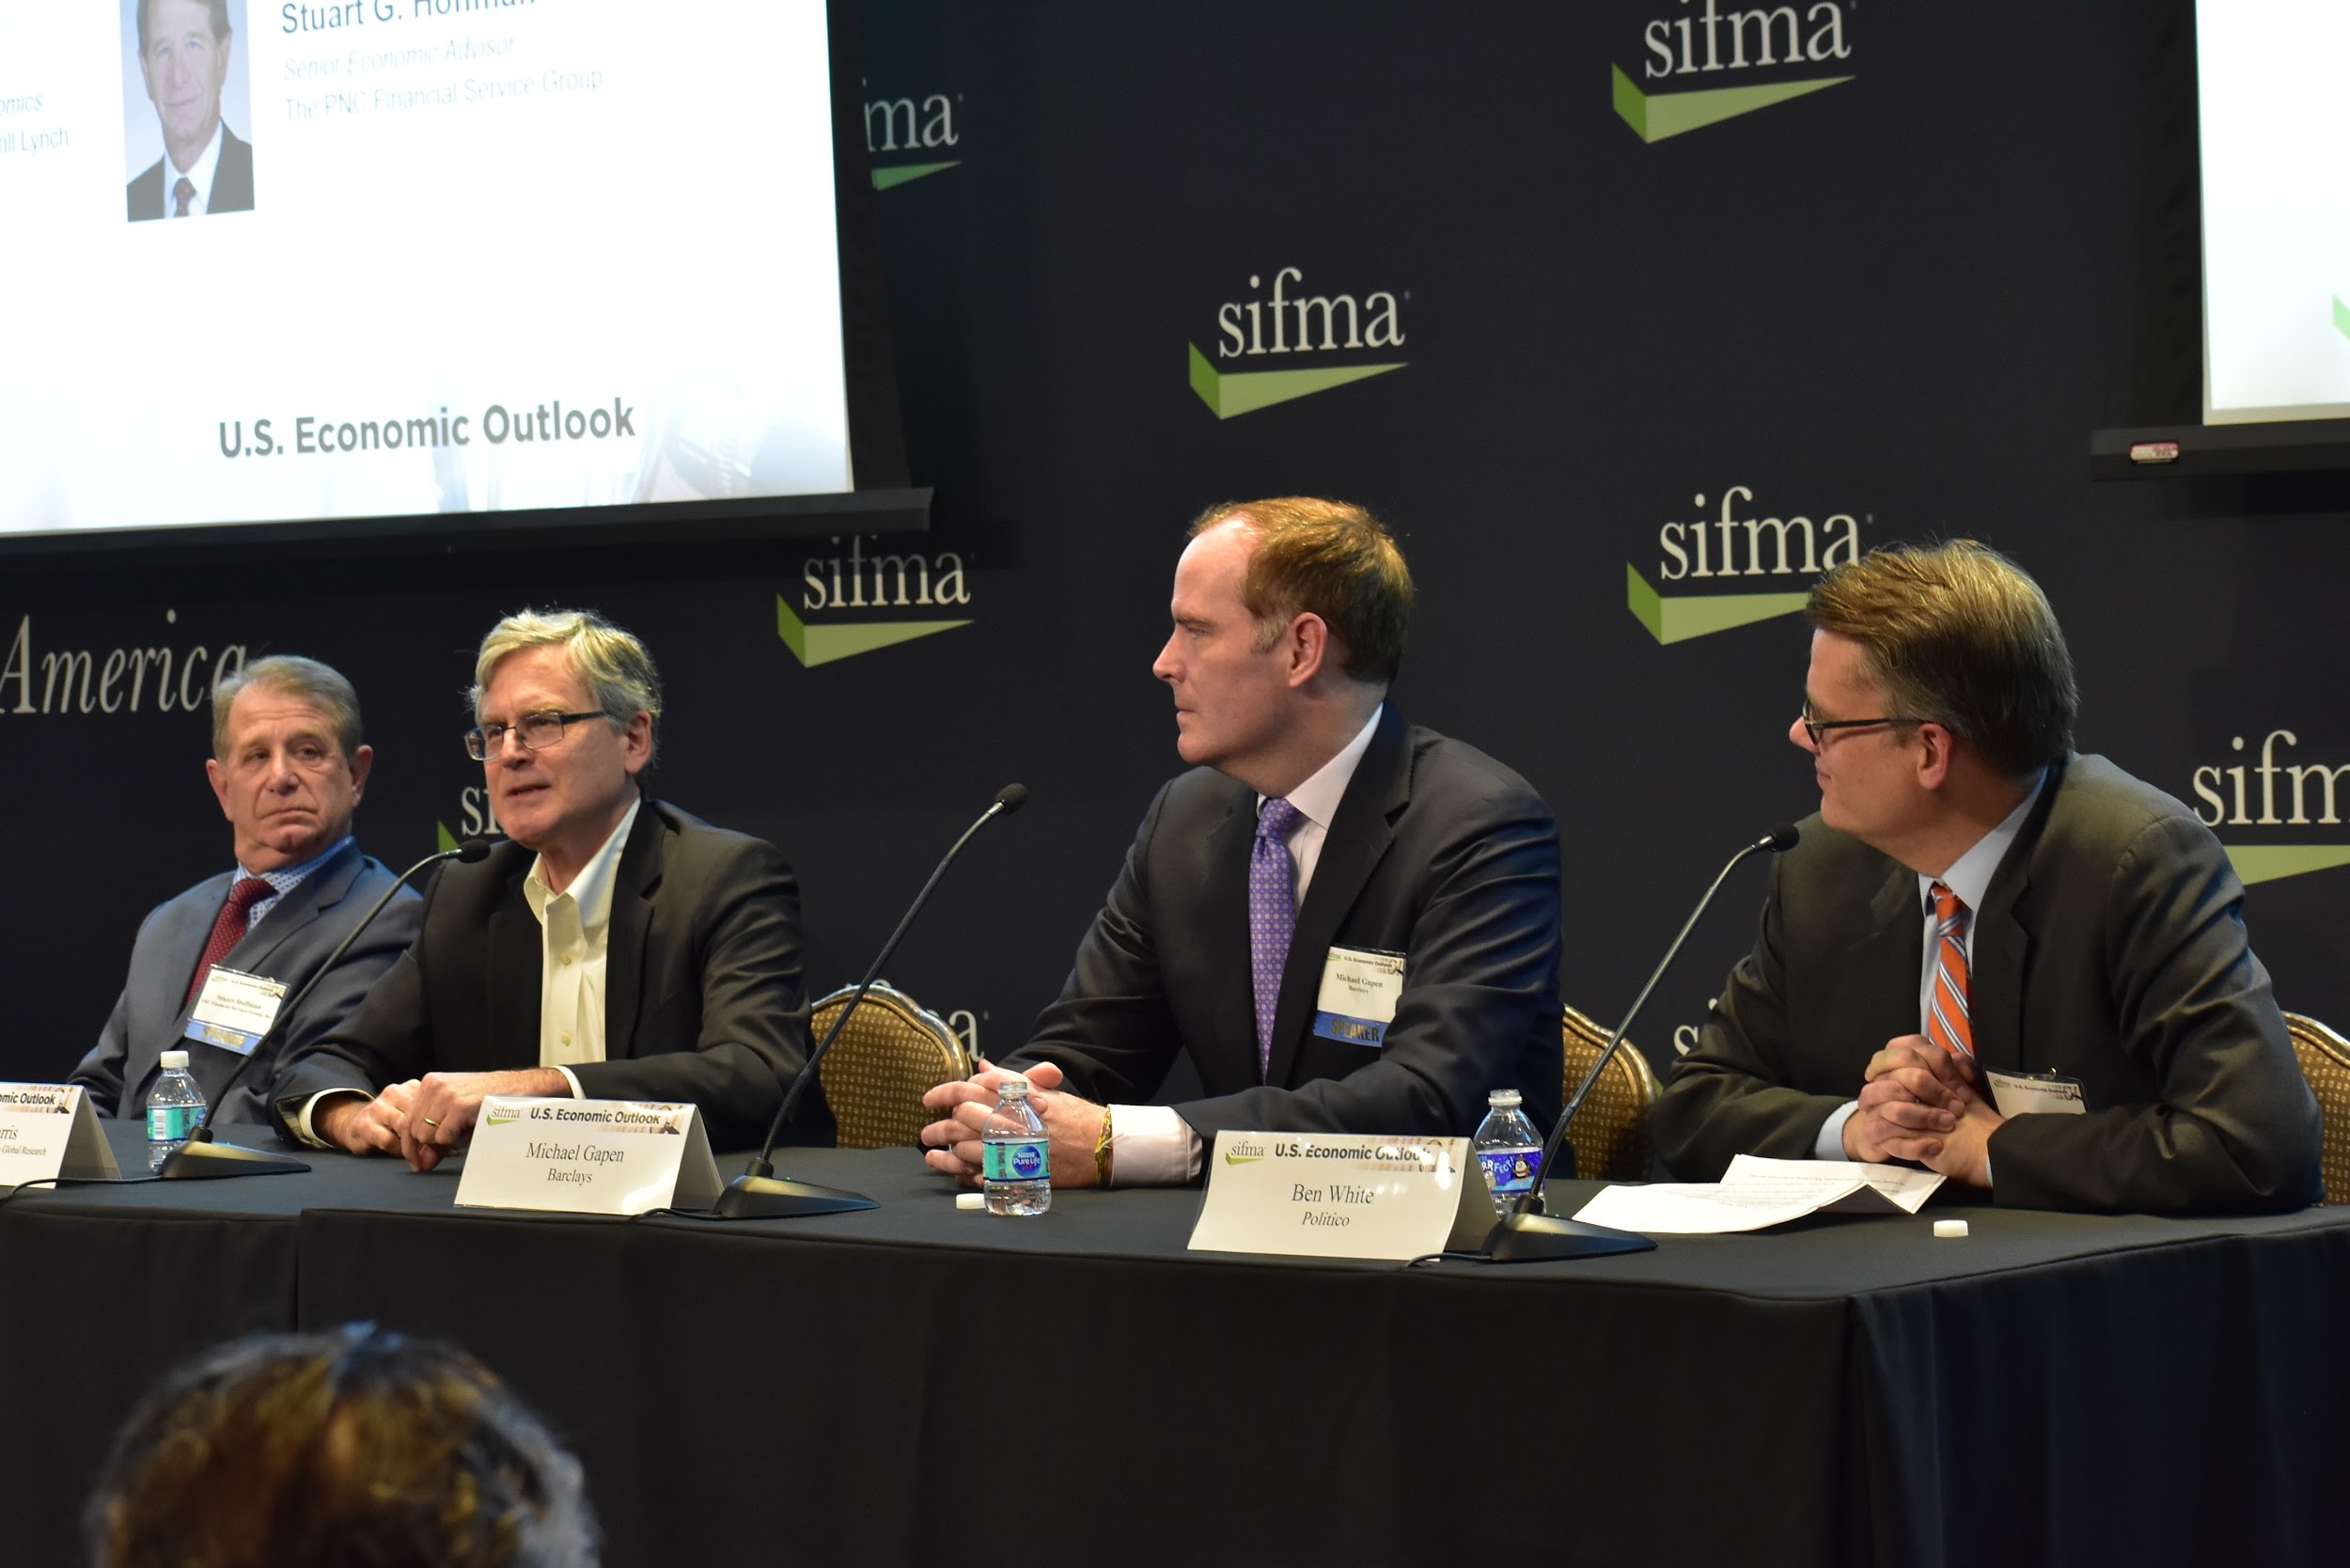 From left: Stuart Hoffman of The PNC Financial Services Group, Ethan Harris of BofA Merrill Lynch Global Research and Michael Gapen of Barclays with Ben White of Politico